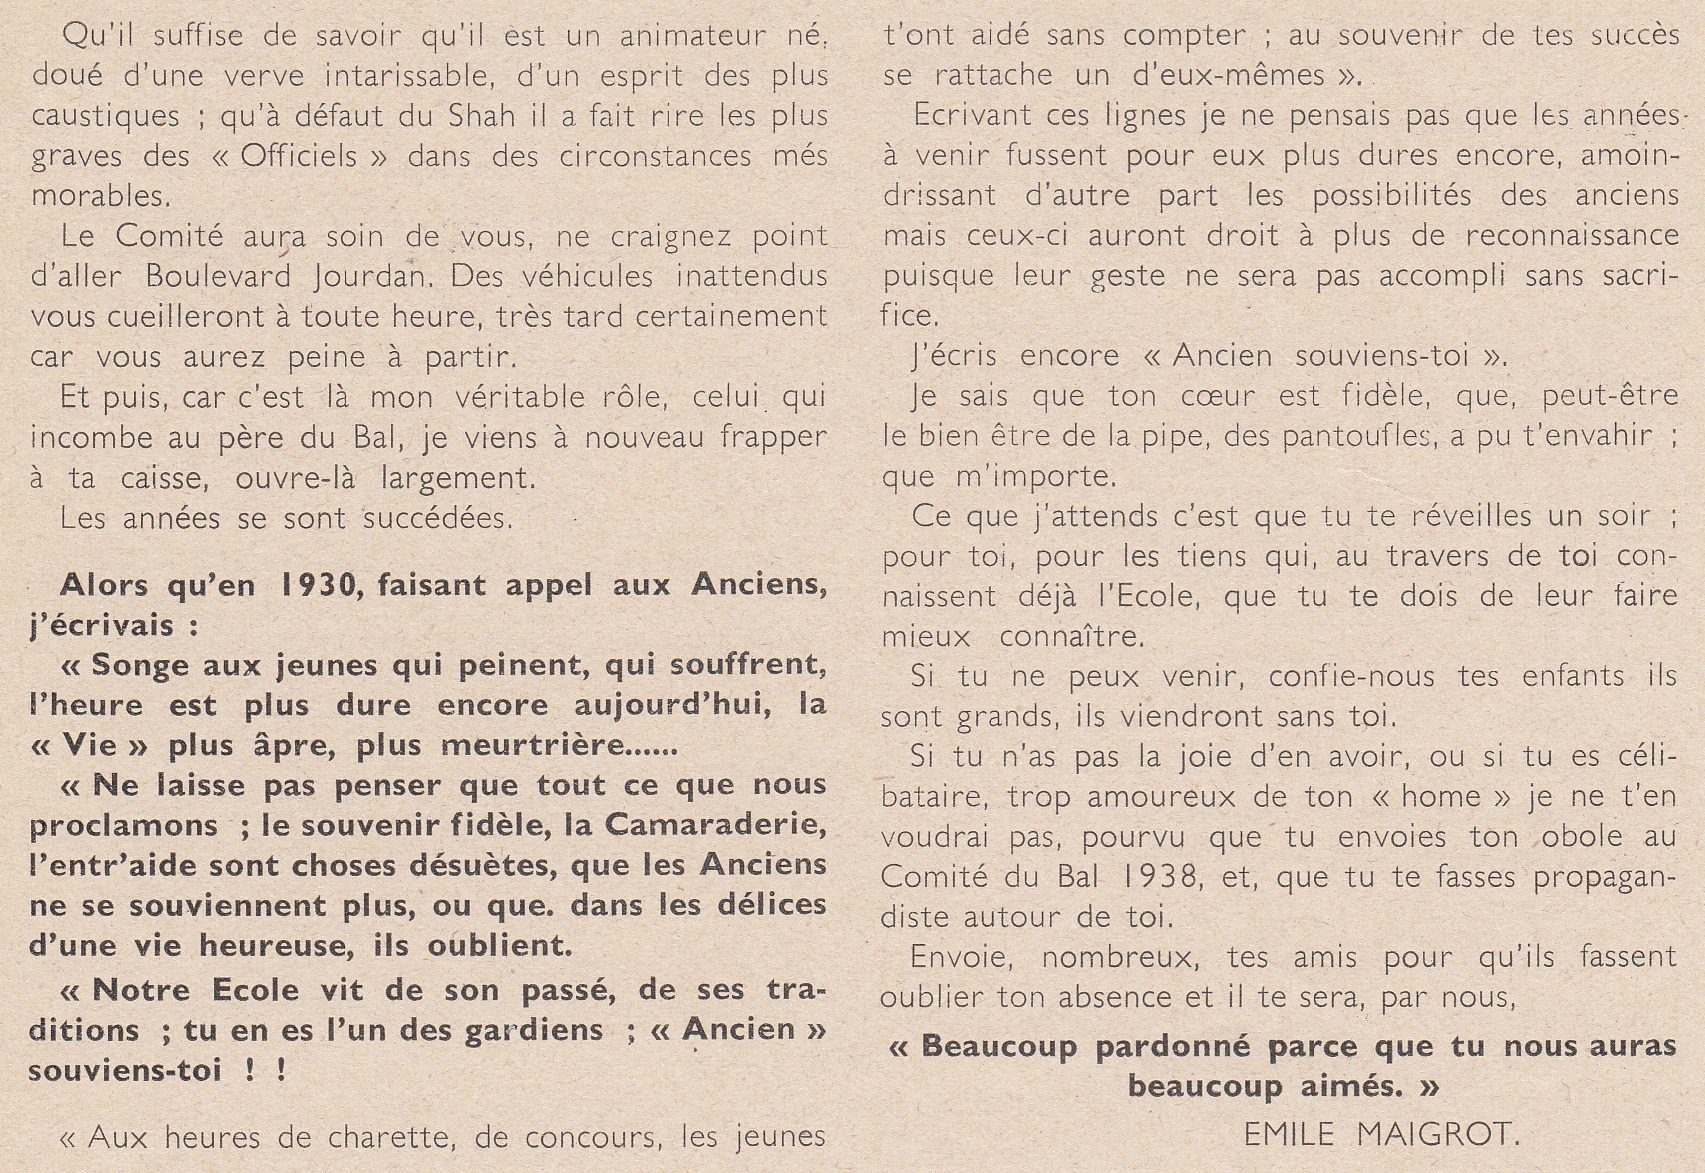 193803_Bulletin-GMBA_1930-1938-Aux-Anciens_Page-2.jpg